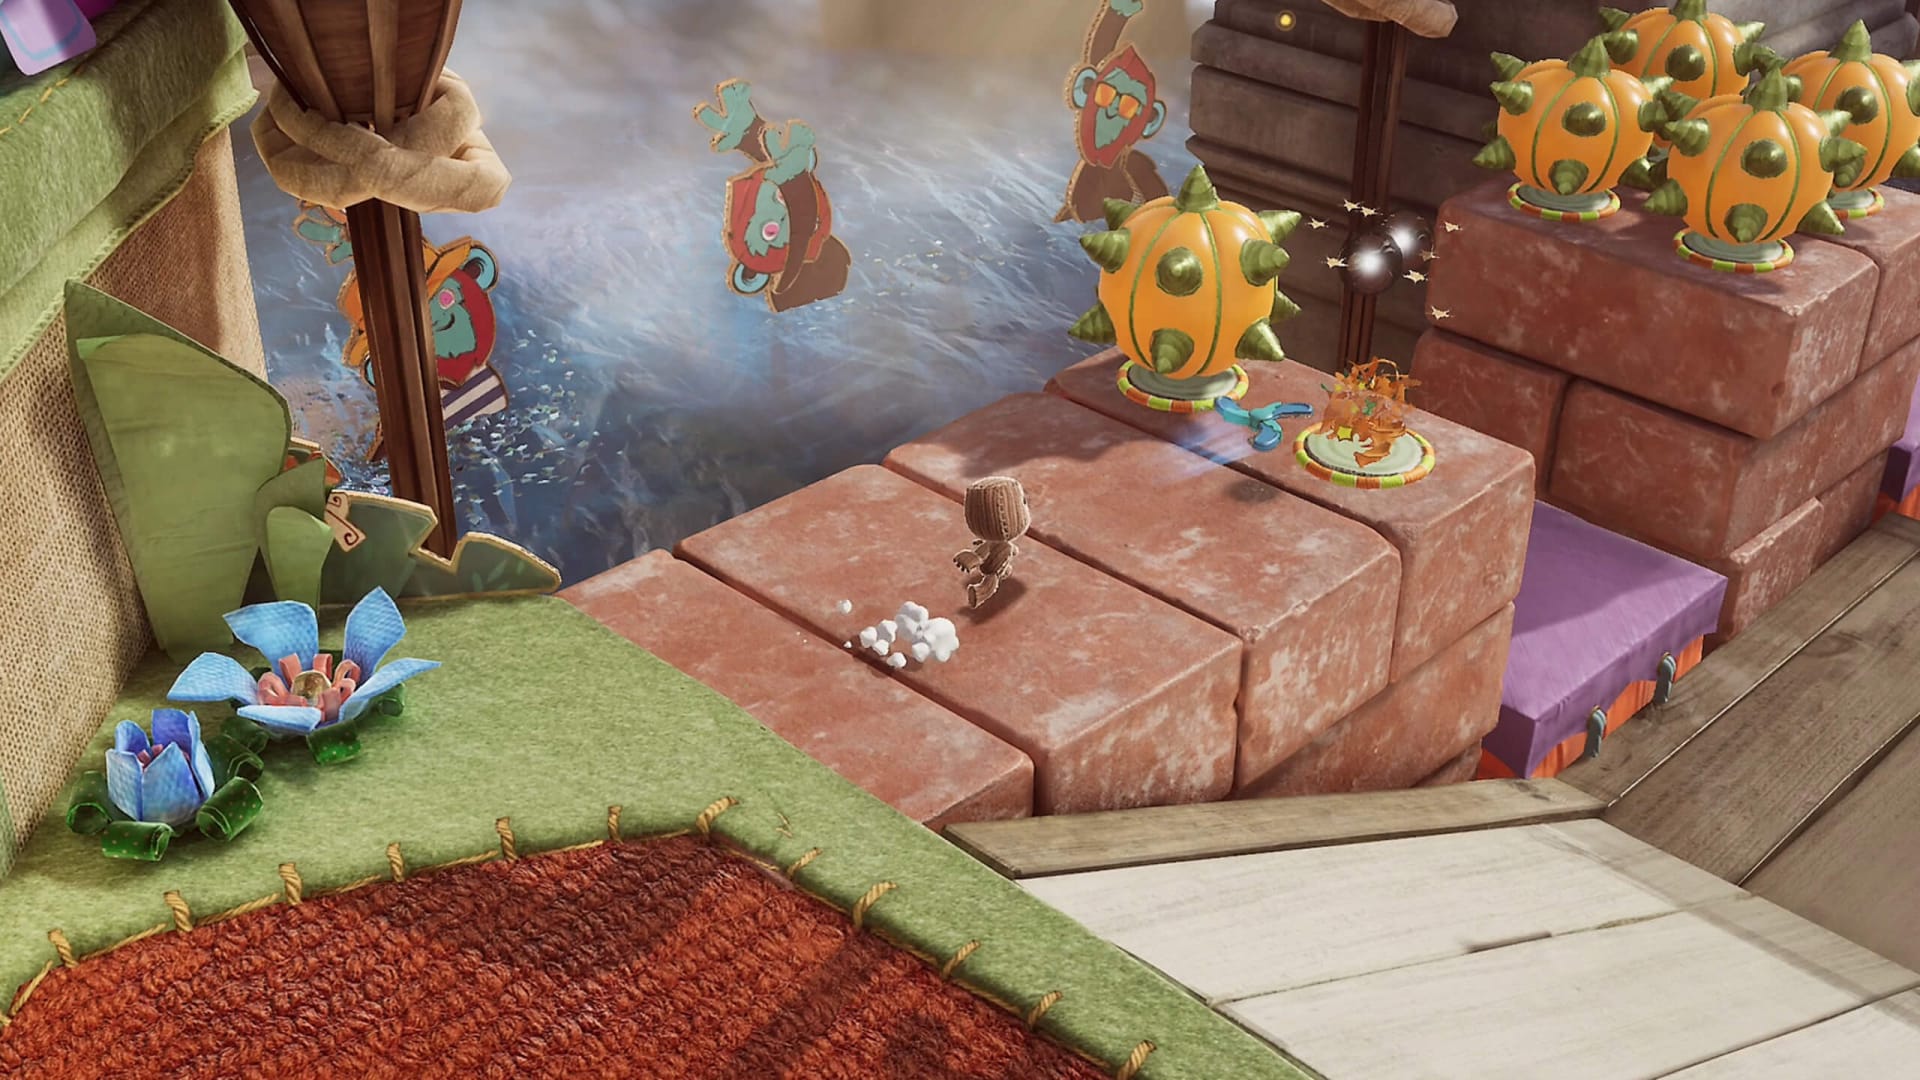 Sackboy running through a level in the PS5 game Sackboy: A Big Adventure, part of the LittleBigPlanet franchise originally created by Media Molecule